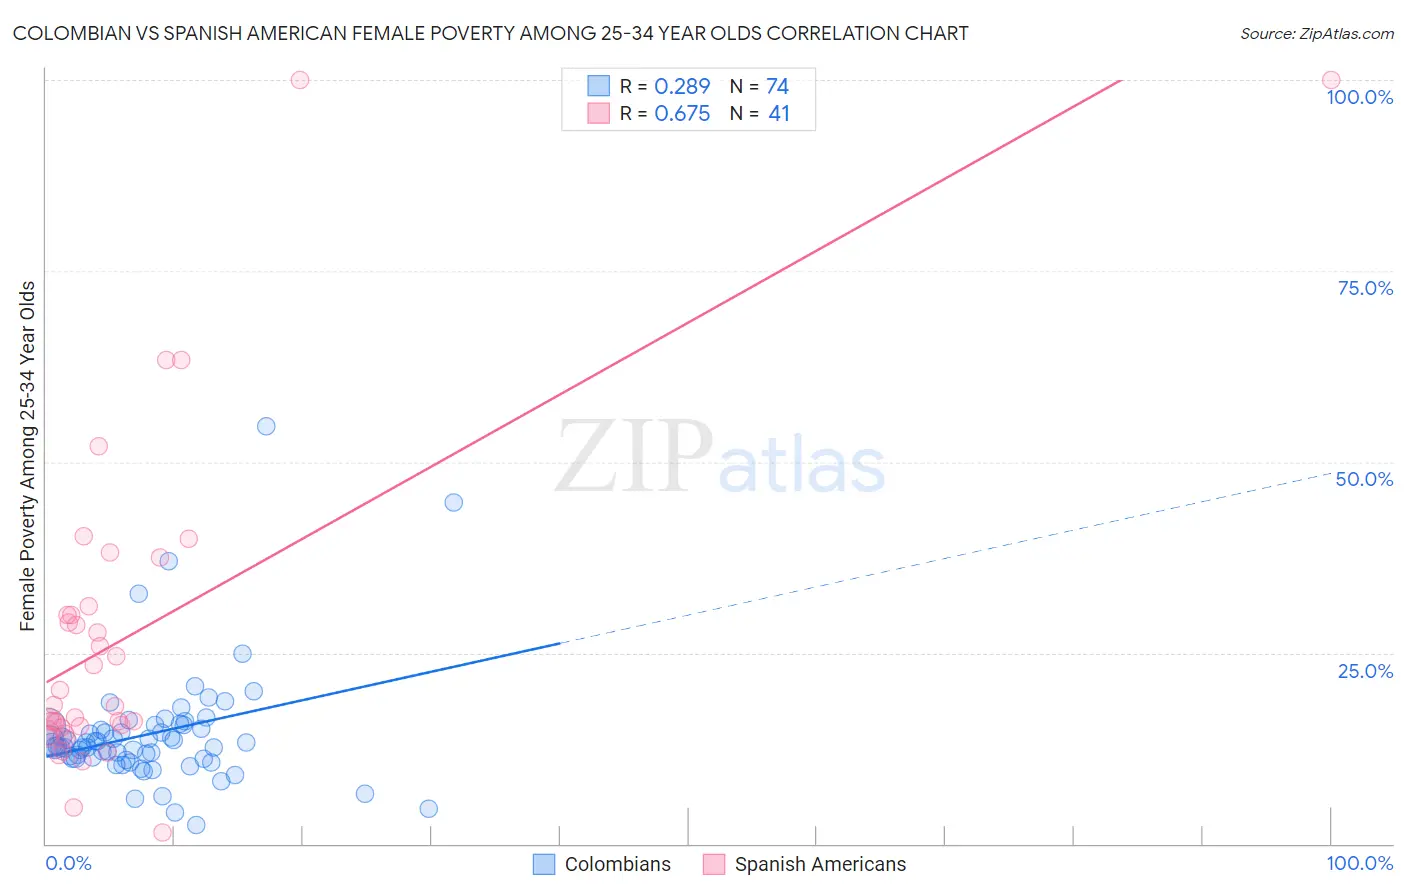 Colombian vs Spanish American Female Poverty Among 25-34 Year Olds